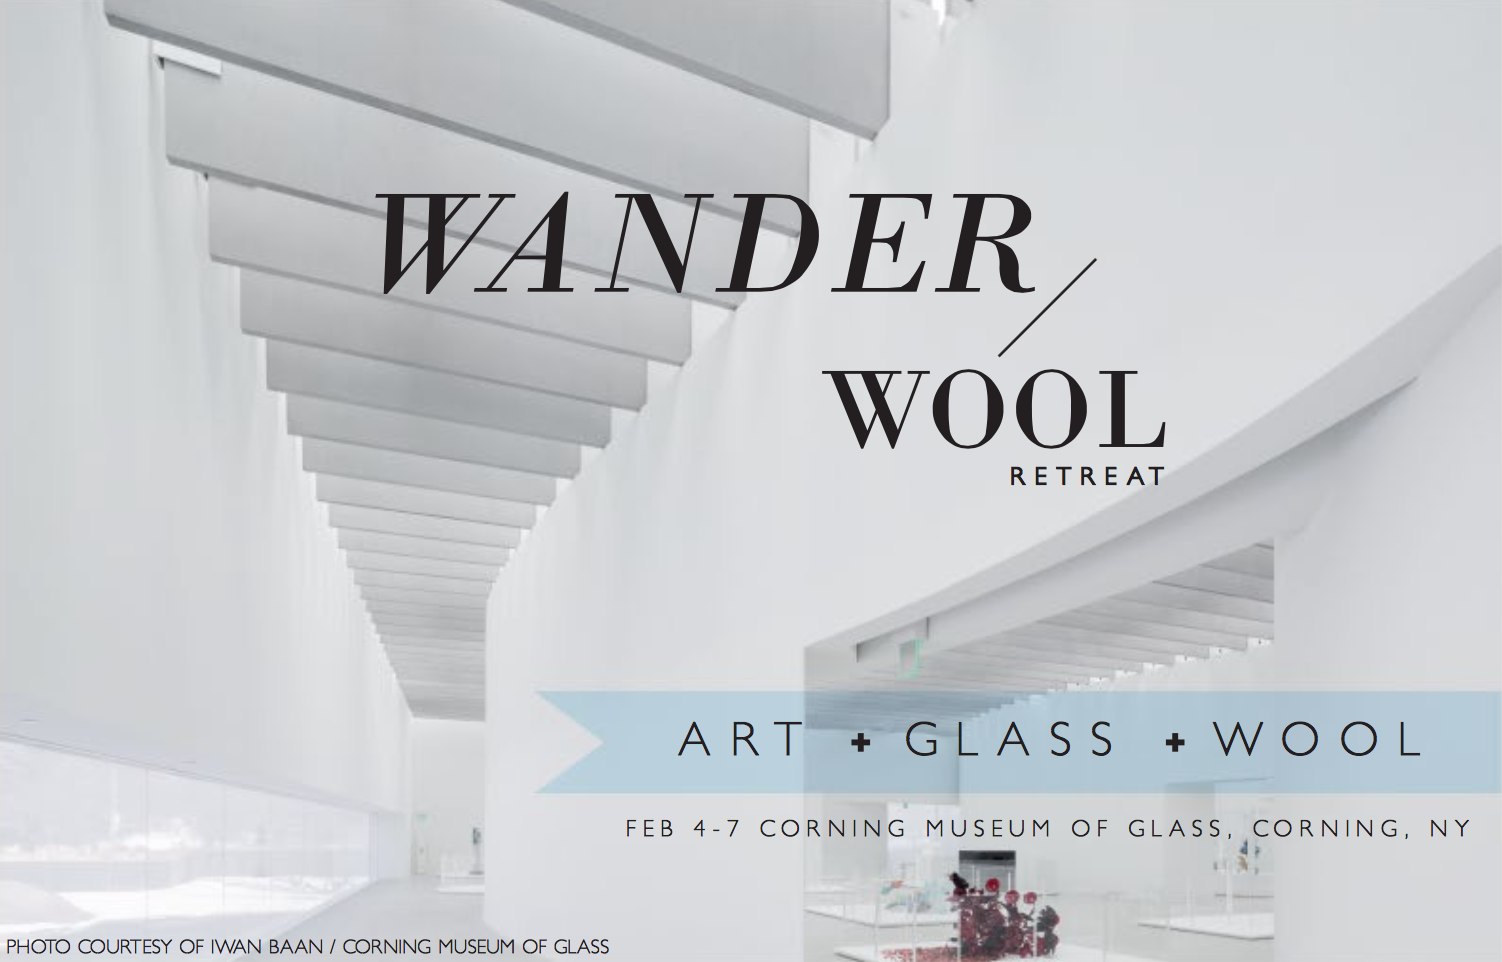 Learn more about the Wander Wool retreat here.